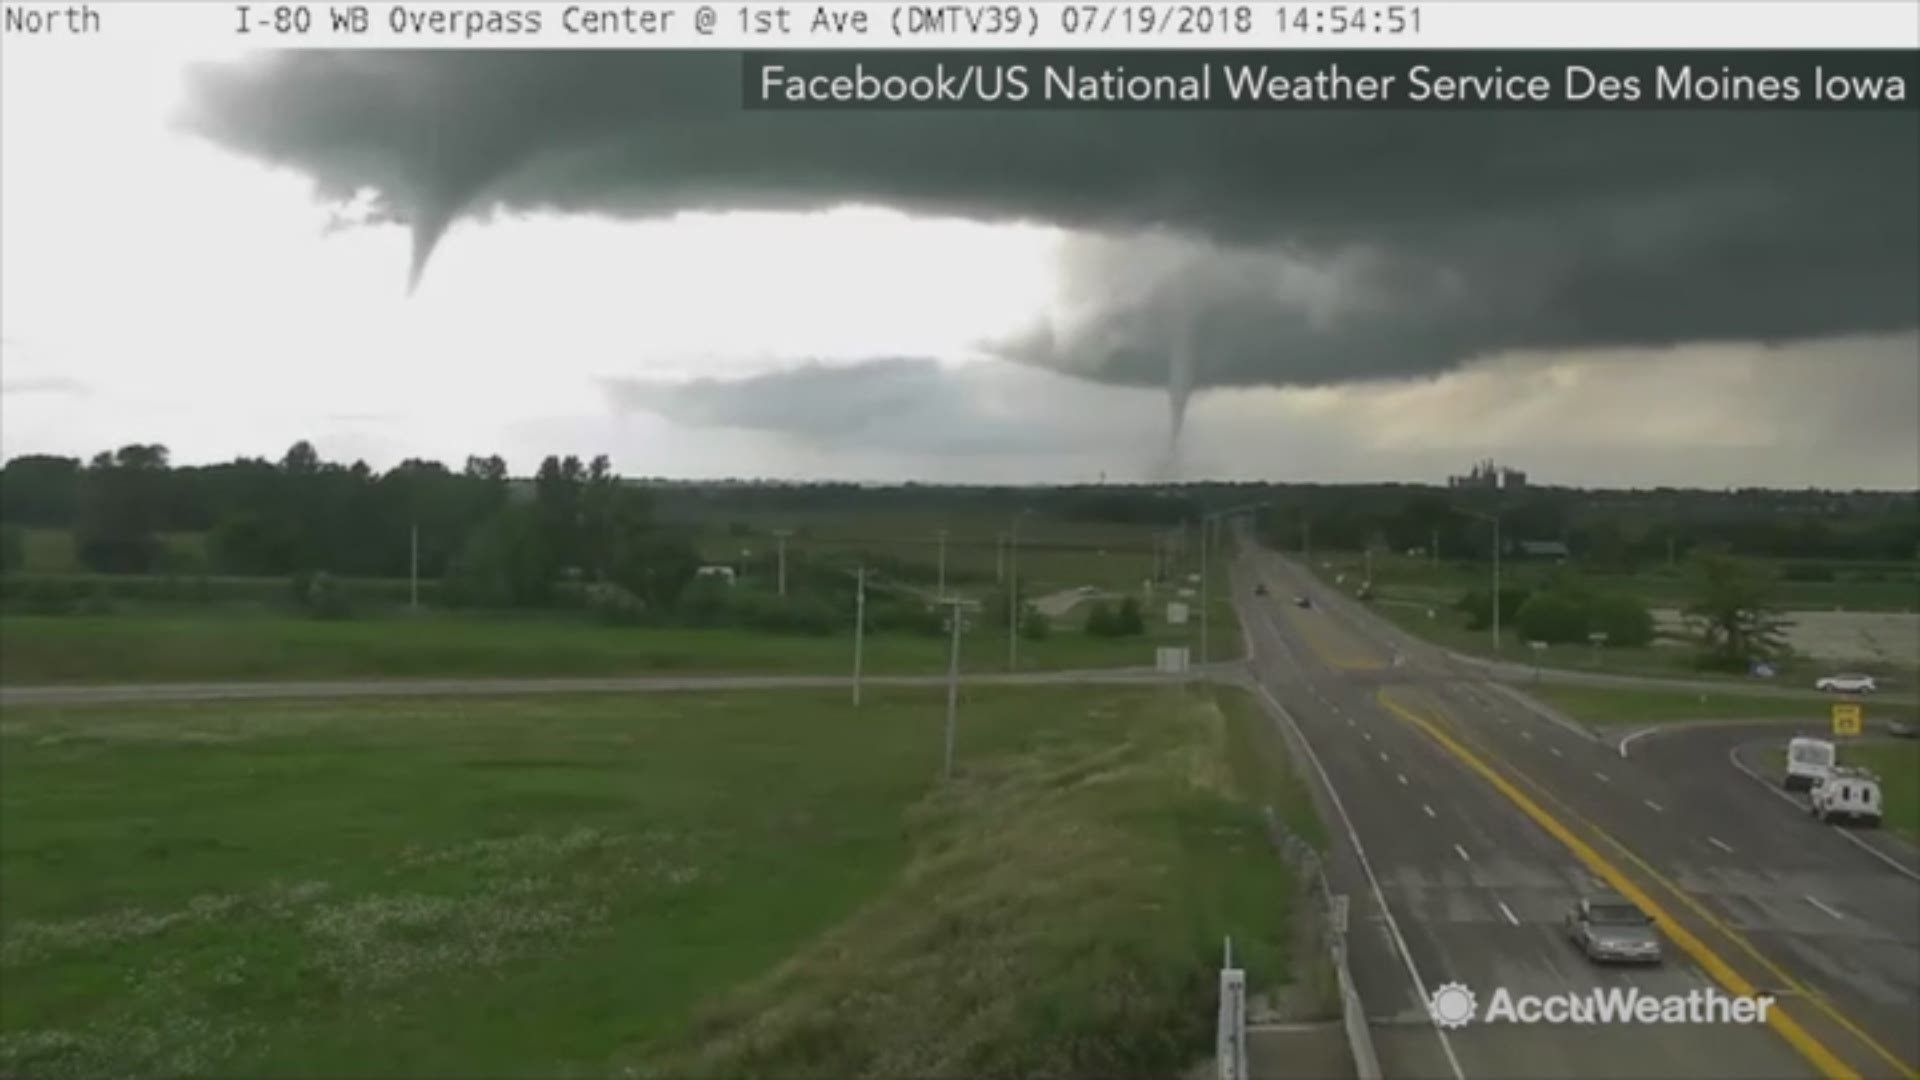 This Iowa Department of Transportation traffic camera captured the two Bondurant tornadoes on July 19. This camera is on I-80 westbound at 1st avenue in Altoona, Iowa. 